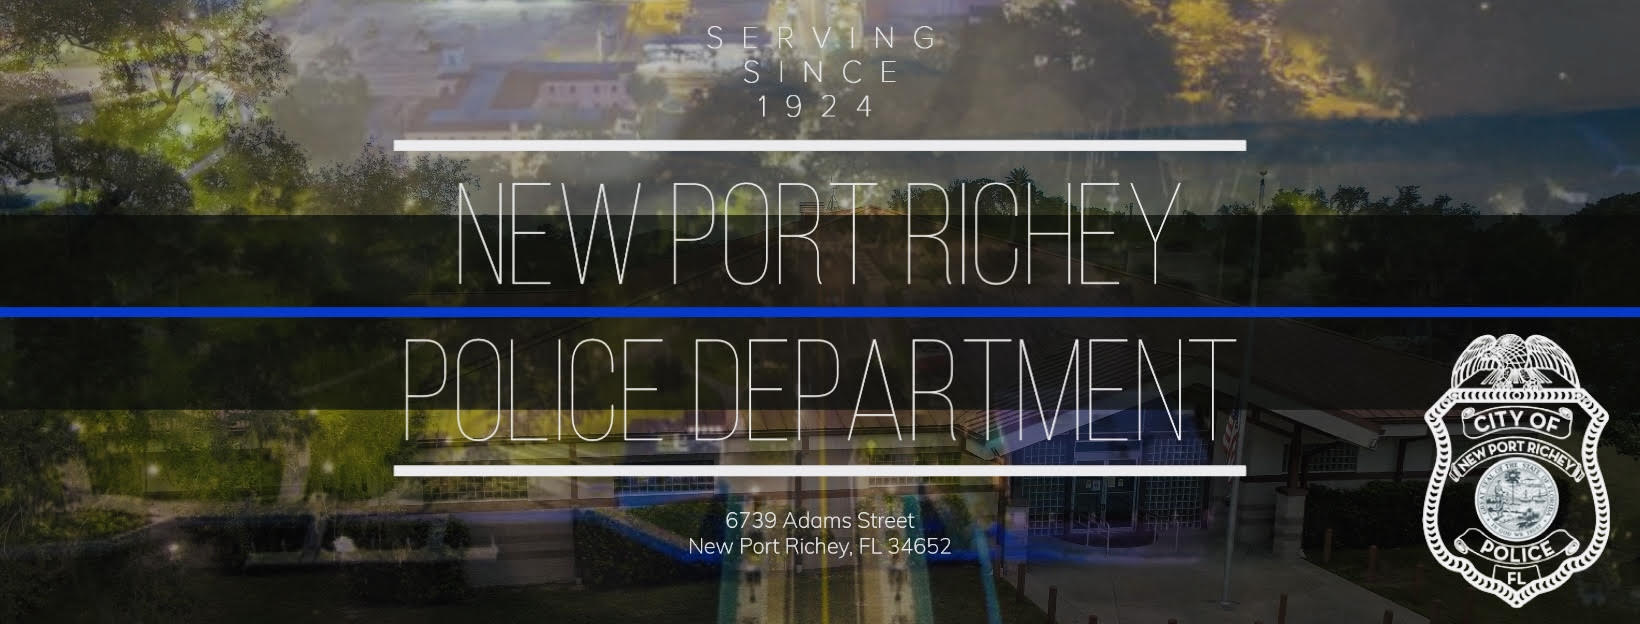 New Port Richey Florida Police Department